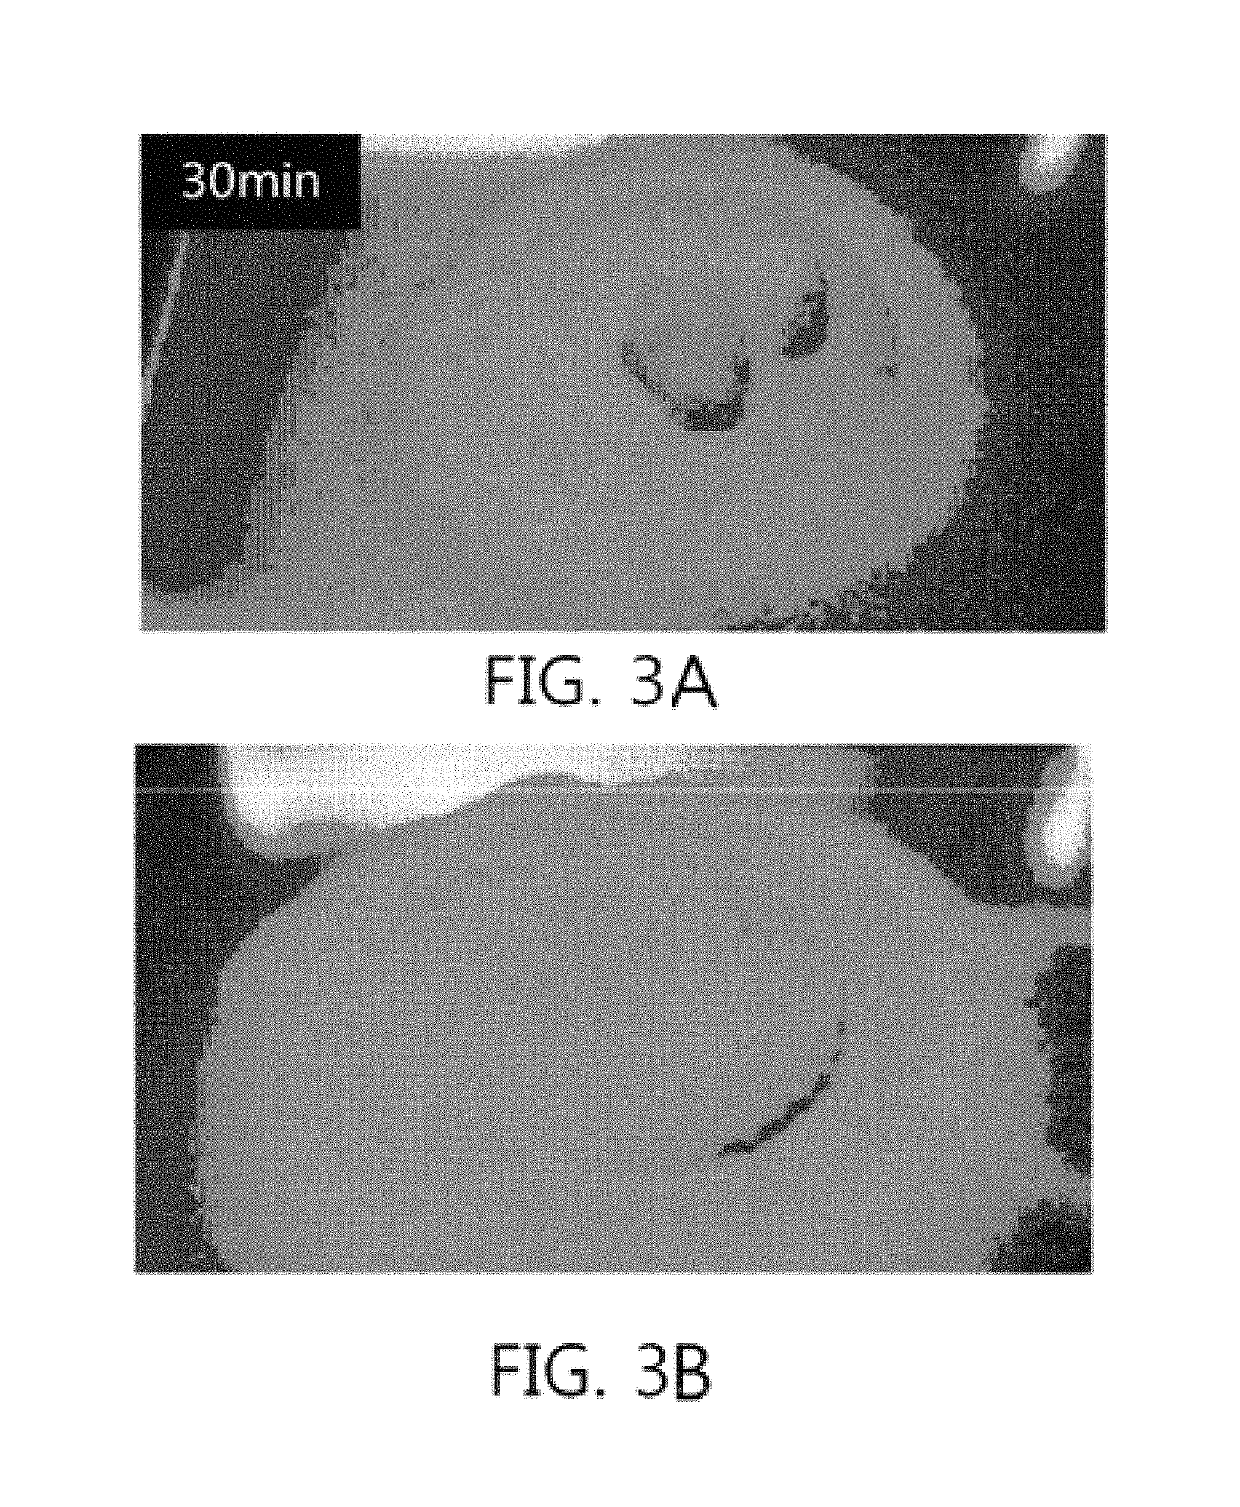 Super absorbent resin having improved solidification resistance, and method for preparing same